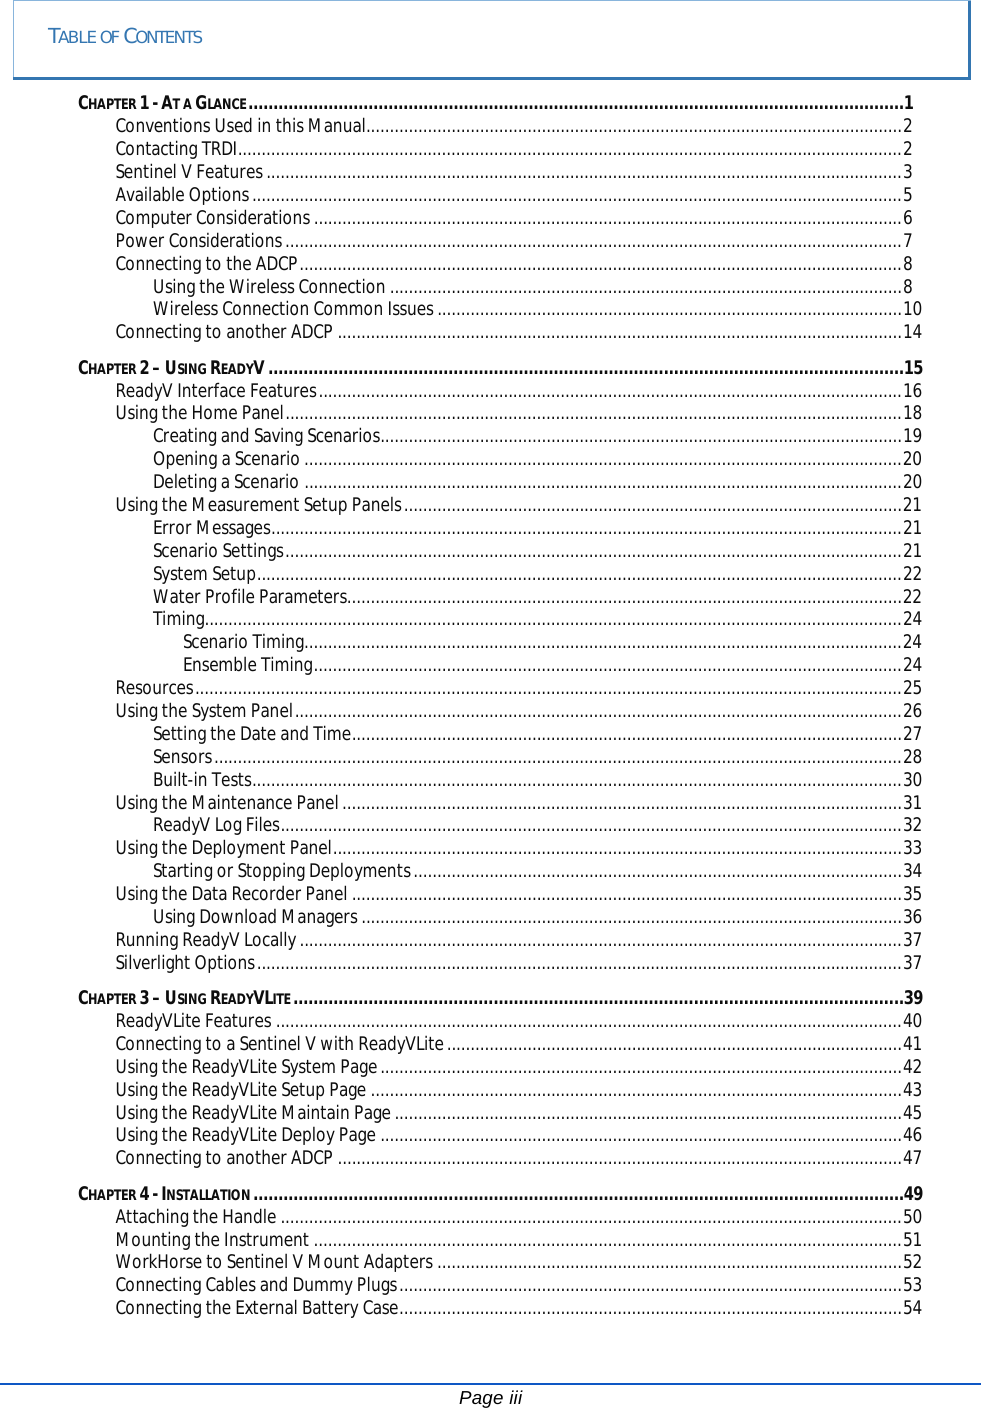  TABLE OF CONTENTS CHAPTER 1 - AT A GLANCE ...................................................................................................................................1 Conventions Used in this Manual................................................................................................................. 2 Contacting TRDI ............................................................................................................................................ 2 Sentinel V Features ...................................................................................................................................... 3 Available Options ......................................................................................................................................... 5 Computer Considerations ............................................................................................................................ 6 Power Considerations .................................................................................................................................. 7 Connecting to the ADCP ............................................................................................................................... 8 Using the Wireless Connection ............................................................................................................ 8 Wireless Connection Common Issues .................................................................................................. 10 Connecting to another ADCP ....................................................................................................................... 14 CHAPTER 2 – USING READYV ...............................................................................................................................15 ReadyV Interface Features ........................................................................................................................... 16 Using the Home Panel .................................................................................................................................. 18 Creating and Saving Scenarios.............................................................................................................. 19 Opening a Scenario .............................................................................................................................. 20 Deleting a Scenario .............................................................................................................................. 20 Using the Measurement Setup Panels ......................................................................................................... 21 Error Messages ..................................................................................................................................... 21 Scenario Settings .................................................................................................................................. 21 System Setup ........................................................................................................................................ 22 Water Profile Parameters..................................................................................................................... 22 Timing................................................................................................................................................... 24 Scenario Timing .............................................................................................................................. 24 Ensemble Timing ............................................................................................................................ 24 Resources ..................................................................................................................................................... 25 Using the System Panel ................................................................................................................................ 26 Setting the Date and Time .................................................................................................................... 27 Sensors ................................................................................................................................................. 28 Built-in Tests ......................................................................................................................................... 30 Using the Maintenance Panel ...................................................................................................................... 31 ReadyV Log Files ................................................................................................................................... 32 Using the Deployment Panel ........................................................................................................................ 33 Starting or Stopping Deployments ....................................................................................................... 34 Using the Data Recorder Panel .................................................................................................................... 35 Using Download Managers .................................................................................................................. 36 Running ReadyV Locally ............................................................................................................................... 37 Silverlight Options ........................................................................................................................................ 37 CHAPTER 3 – USING READYVLITE ..........................................................................................................................39 ReadyVLite Features .................................................................................................................................... 40 Connecting to a Sentinel V with ReadyVLite ................................................................................................ 41 Using the ReadyVLite System Page .............................................................................................................. 42 Using the ReadyVLite Setup Page ................................................................................................................ 43 Using the ReadyVLite Maintain Page ........................................................................................................... 45 Using the ReadyVLite Deploy Page .............................................................................................................. 46 Connecting to another ADCP ....................................................................................................................... 47 CHAPTER 4 - INSTALLATION ..................................................................................................................................49 Attaching the Handle ................................................................................................................................... 50 Mounting the Instrument ............................................................................................................................ 51 WorkHorse to Sentinel V Mount Adapters .................................................................................................. 52 Connecting Cables and Dummy Plugs .......................................................................................................... 53 Connecting the External Battery Case .......................................................................................................... 54 Page iii 